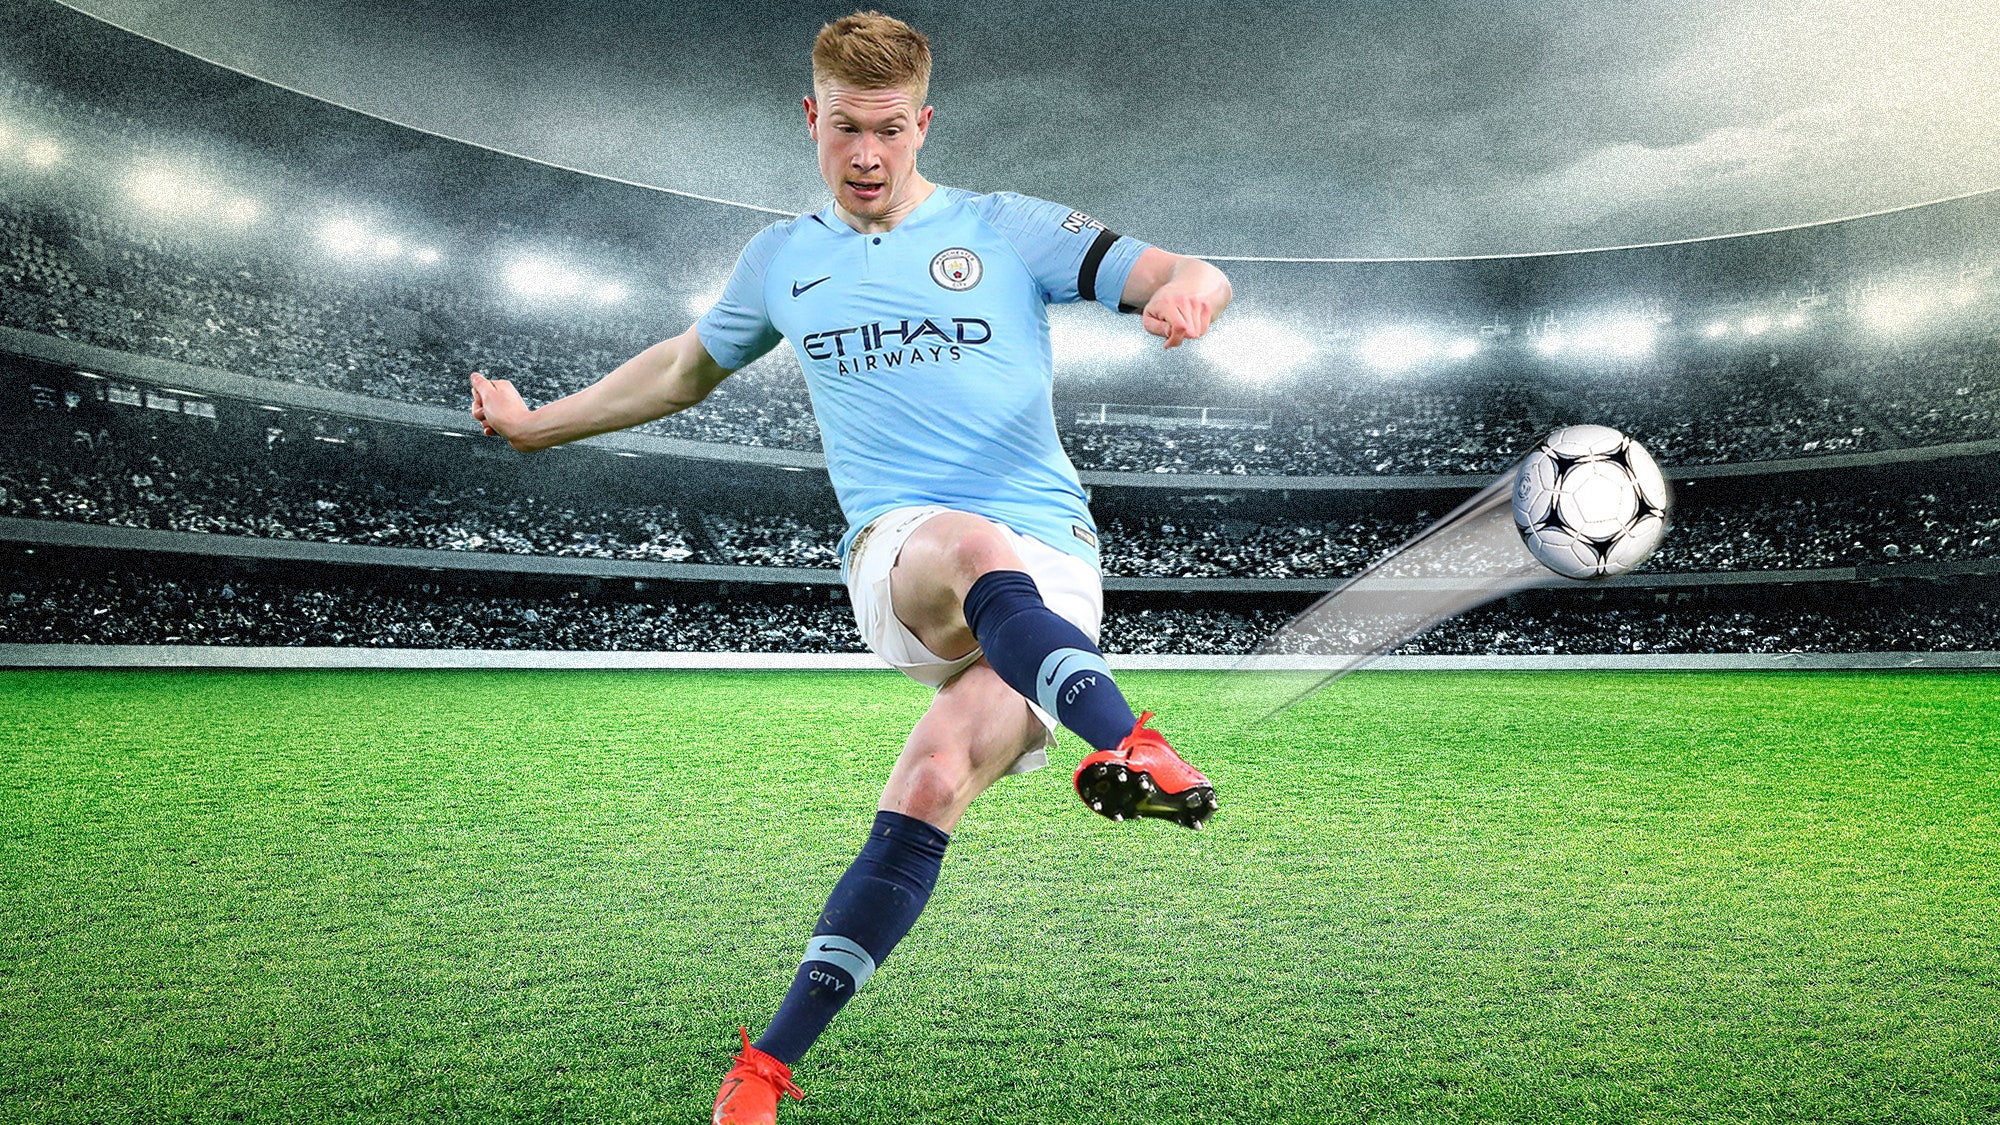 Is Kevin De Bruyne the Best Soccer Player in the World?